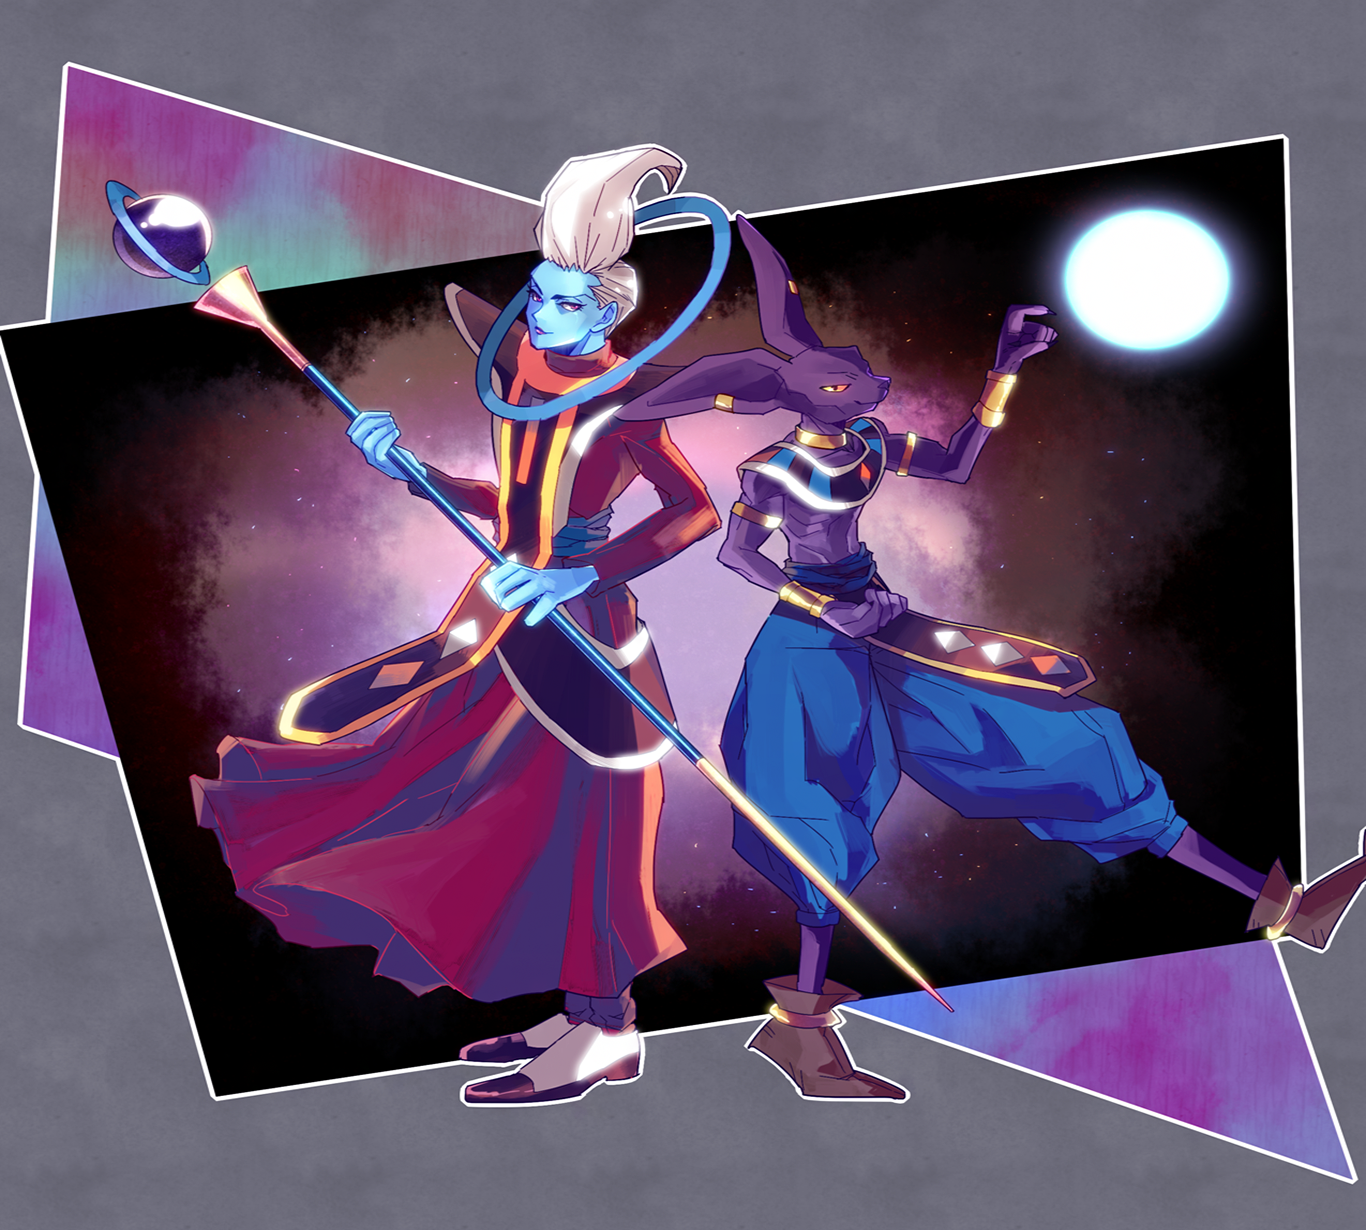 Whis Wallpapers